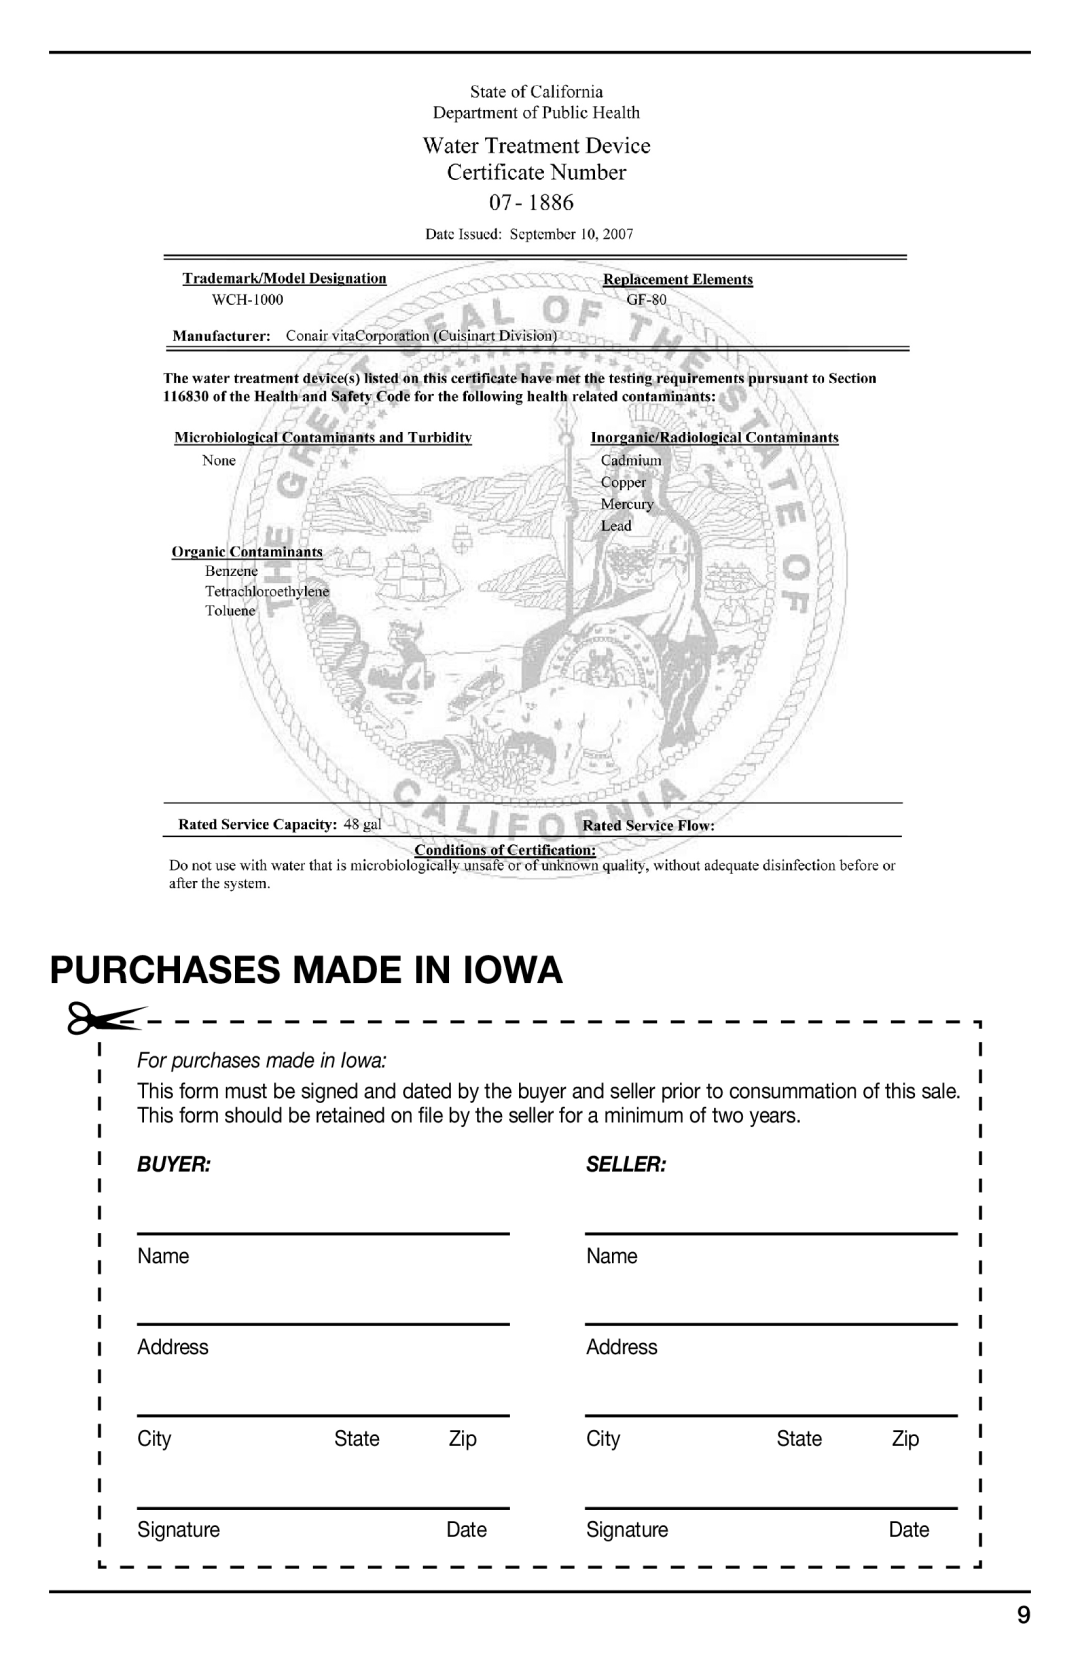 Cuisinart WCH-1000, IB-8895A manual Purchases Made In Iowa, For purchases made in Iowa, Buyer Seller 